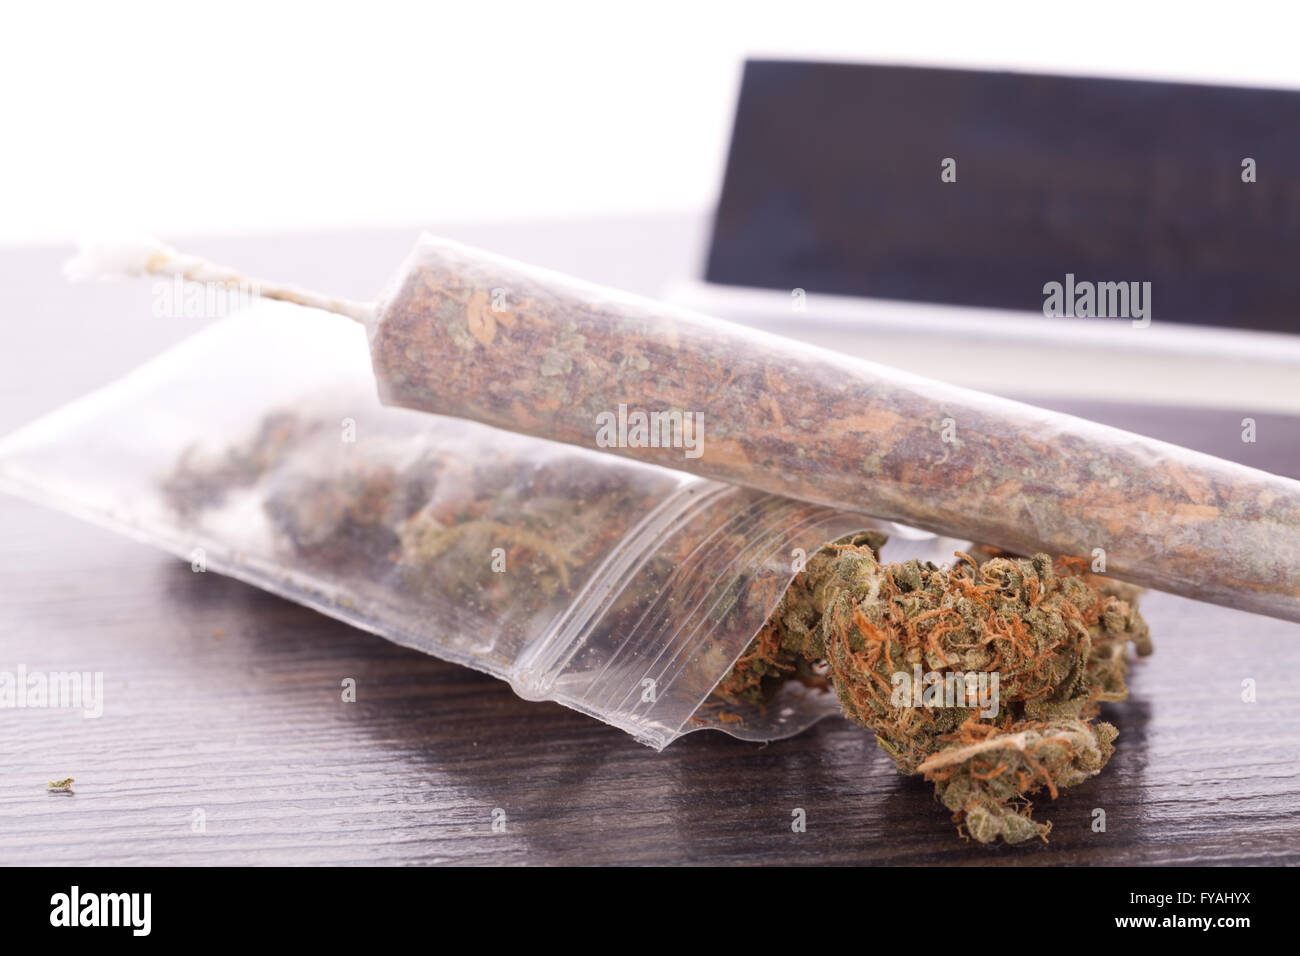 Tetra hydro cannabiol hi-res stock photography and images - Alamy